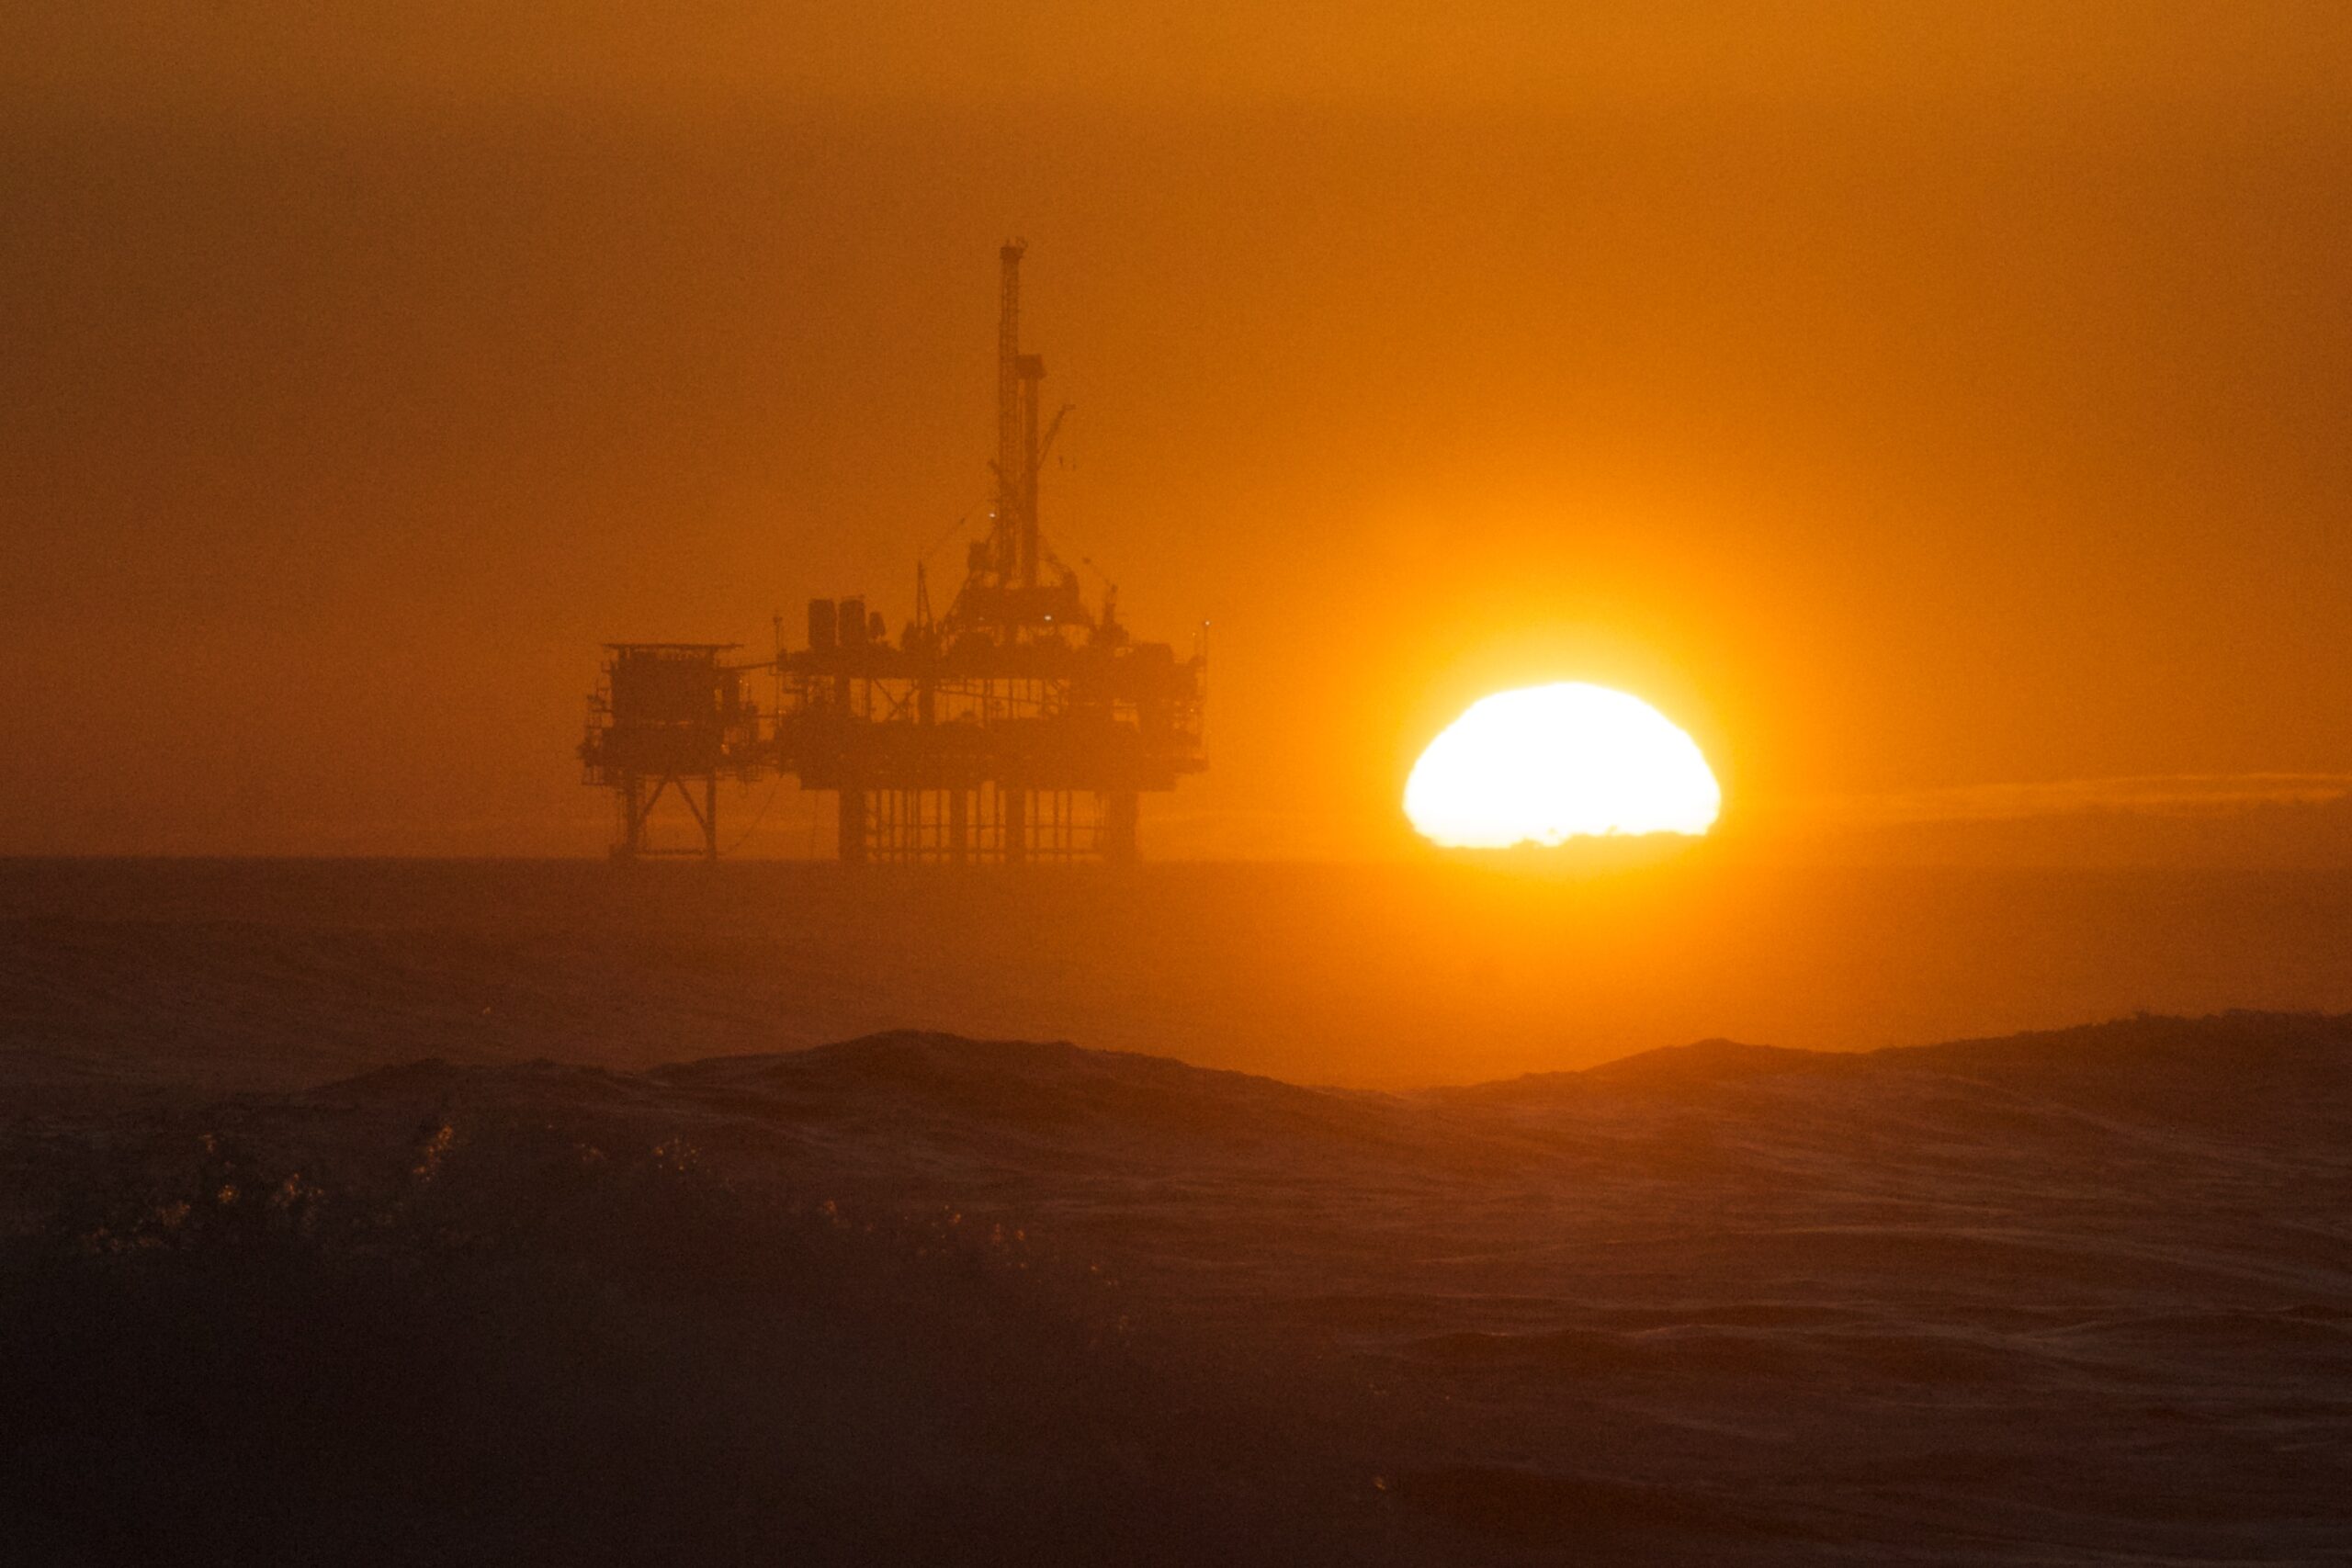 Offshore oil and gas drilling platform against red sky